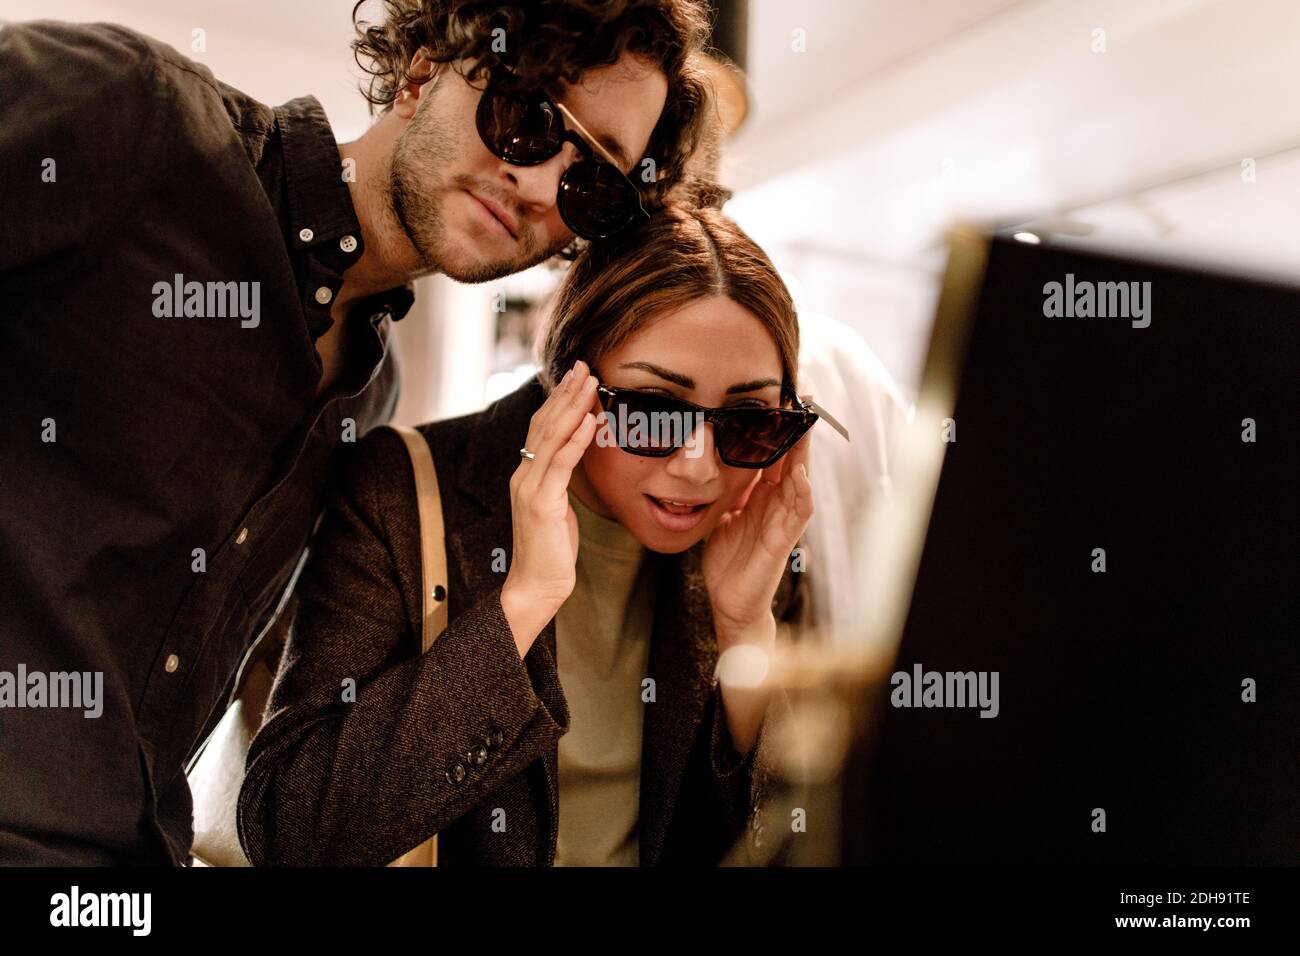 Smiling woman trying fashionable sunglasses with friend at store Stock Photo